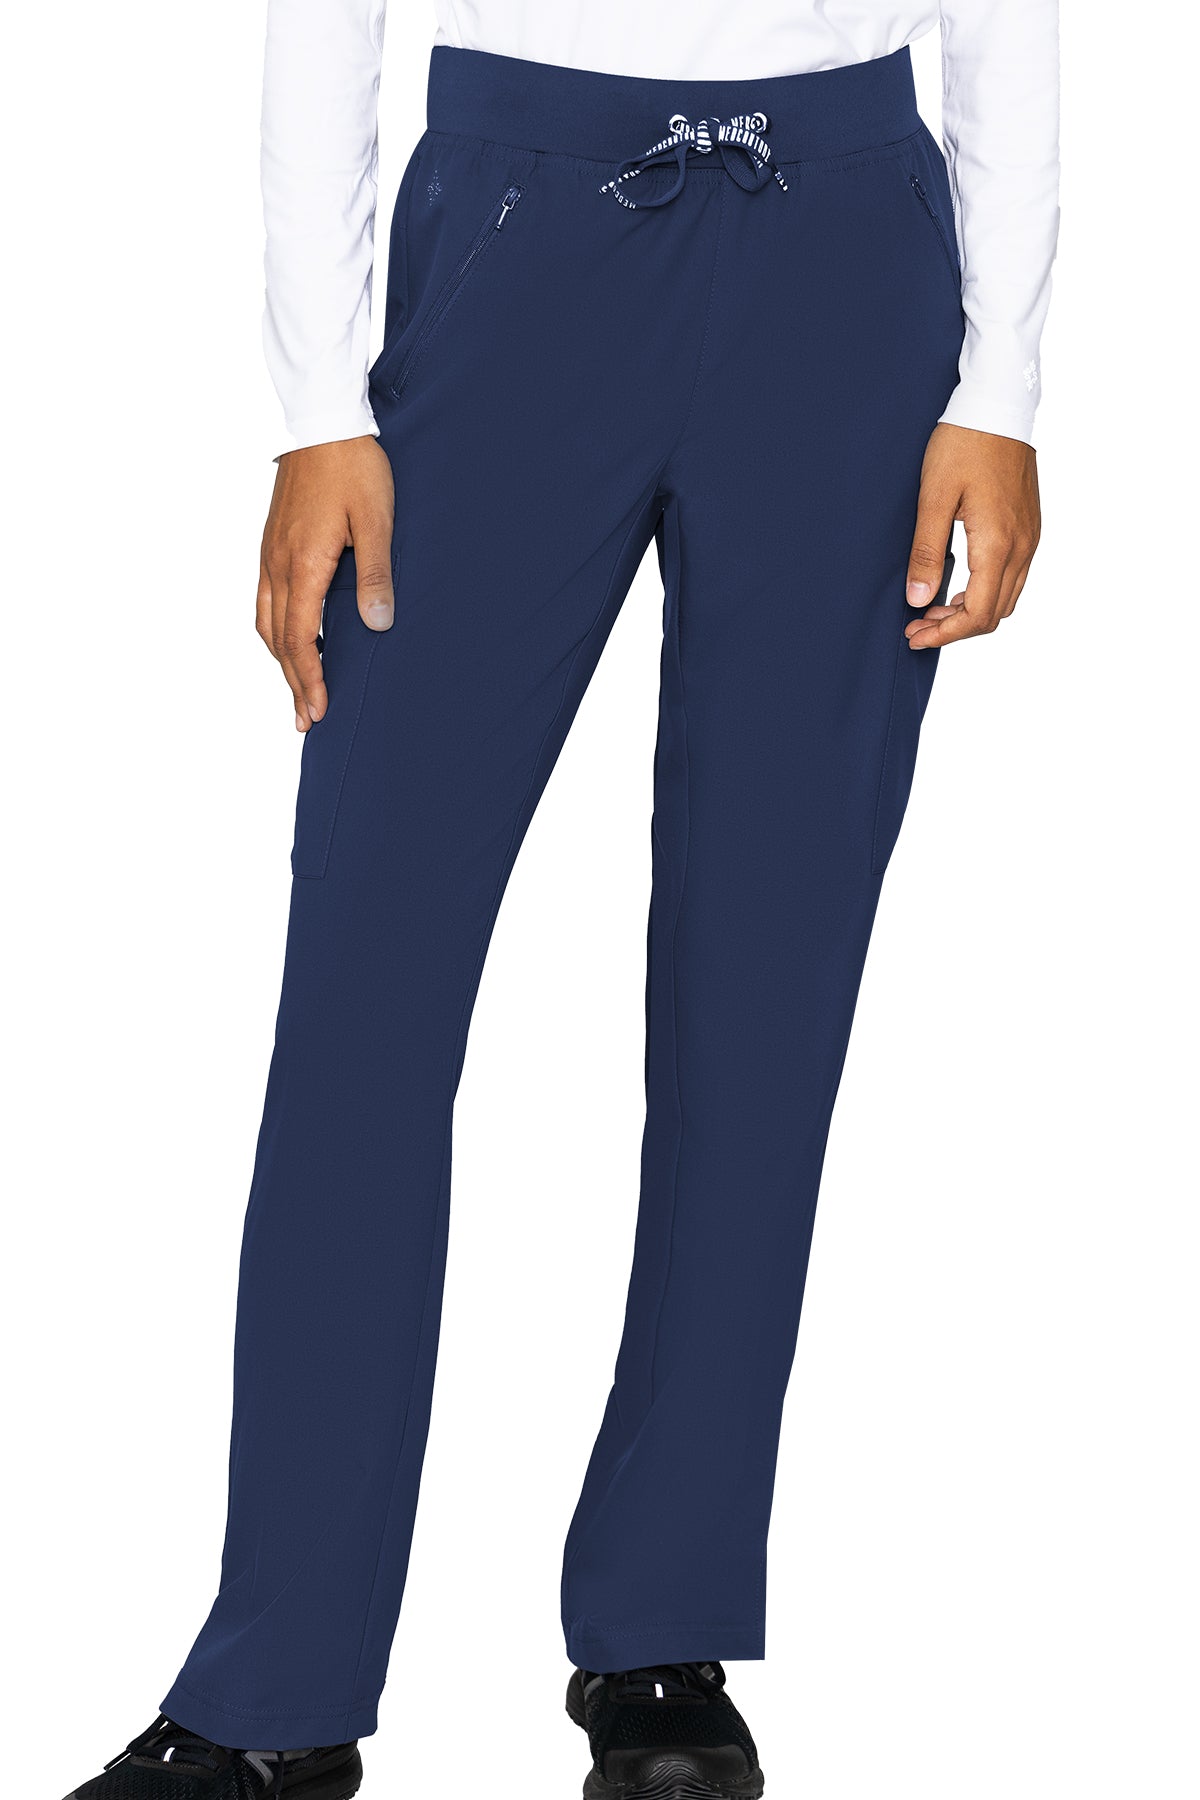 Med Couture Petite Scrub Pants Insight Zipper Pocket Pant in Navy at Parker's Clothing and Shoes